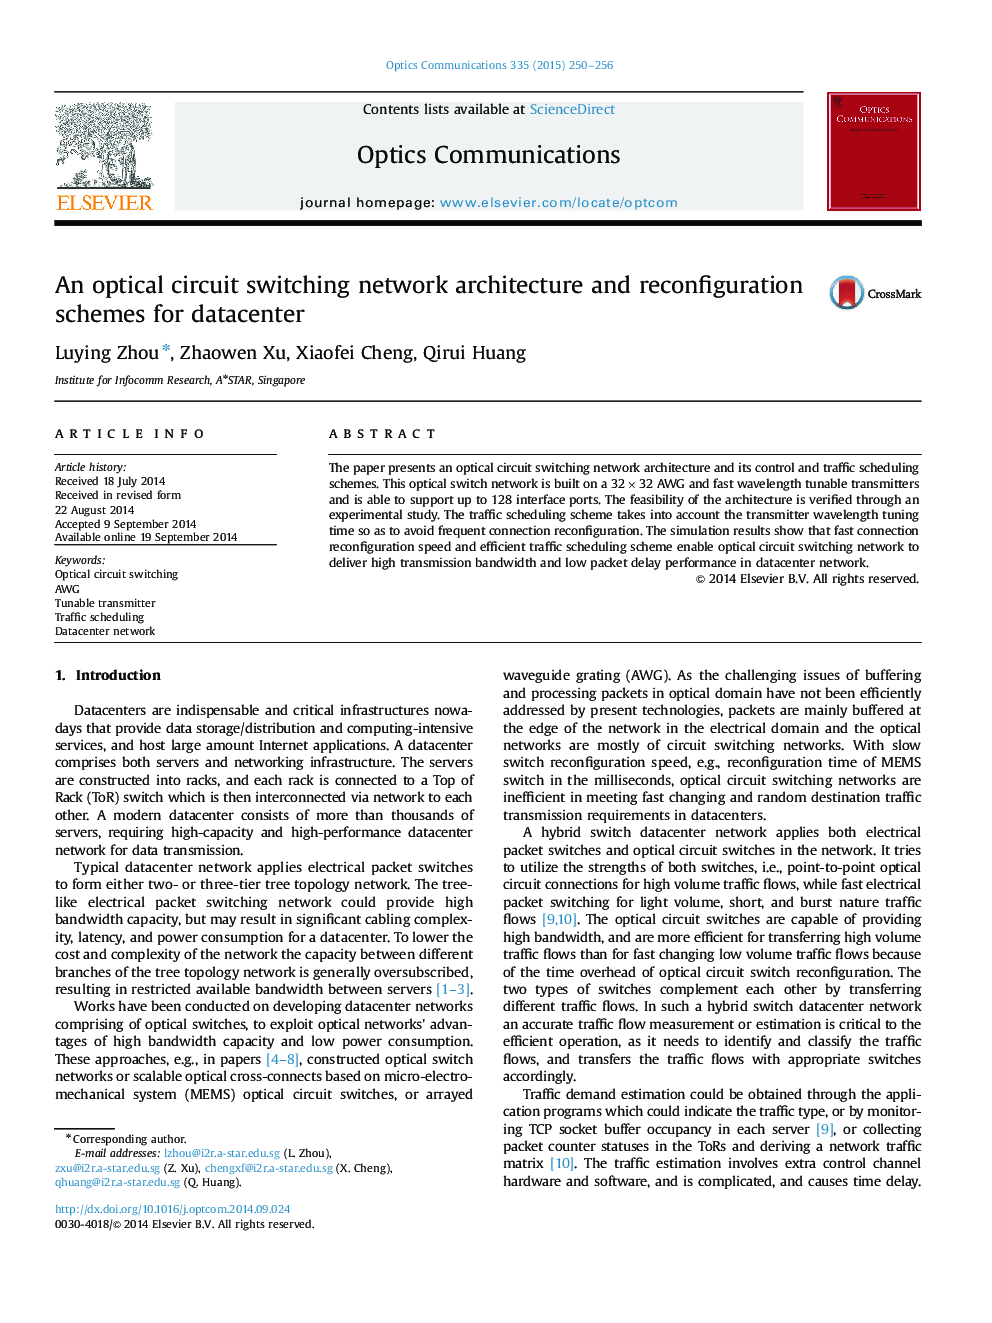 An optical circuit switching network architecture and reconfiguration schemes for datacenter